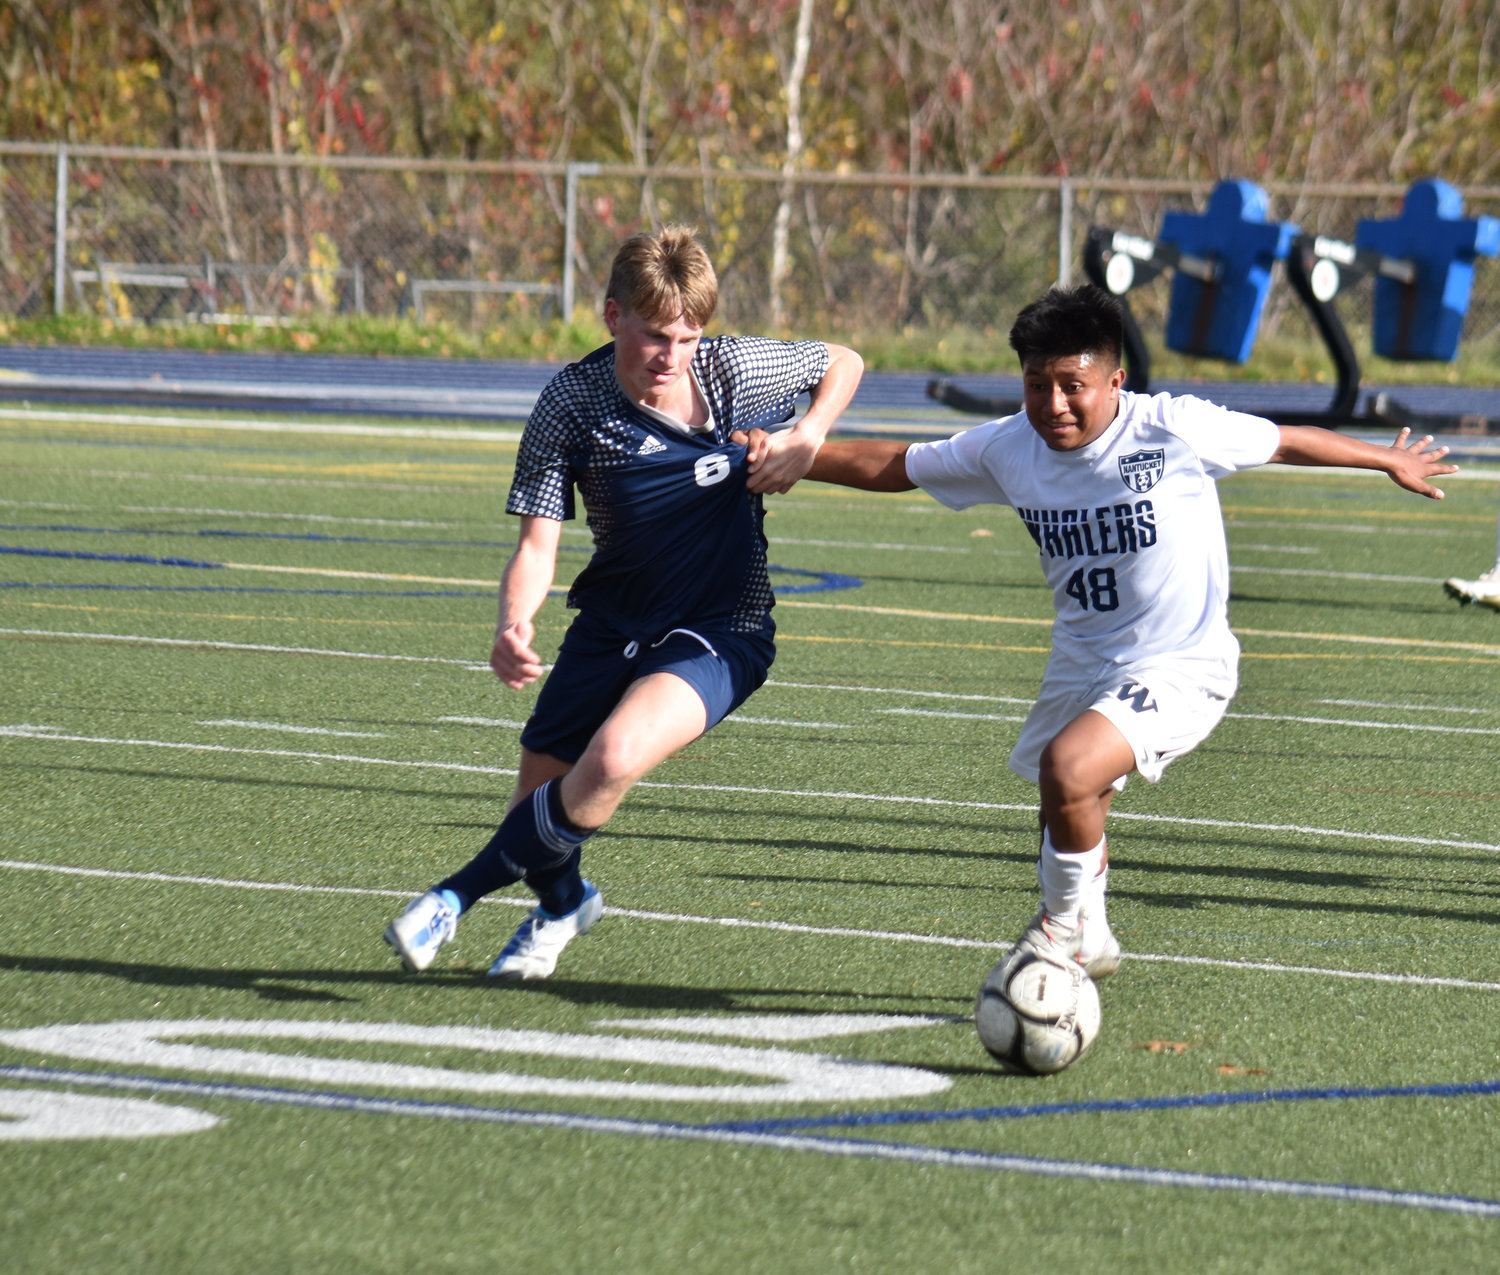 Ericson Yonilson and a Cohasset player jockey for possession.